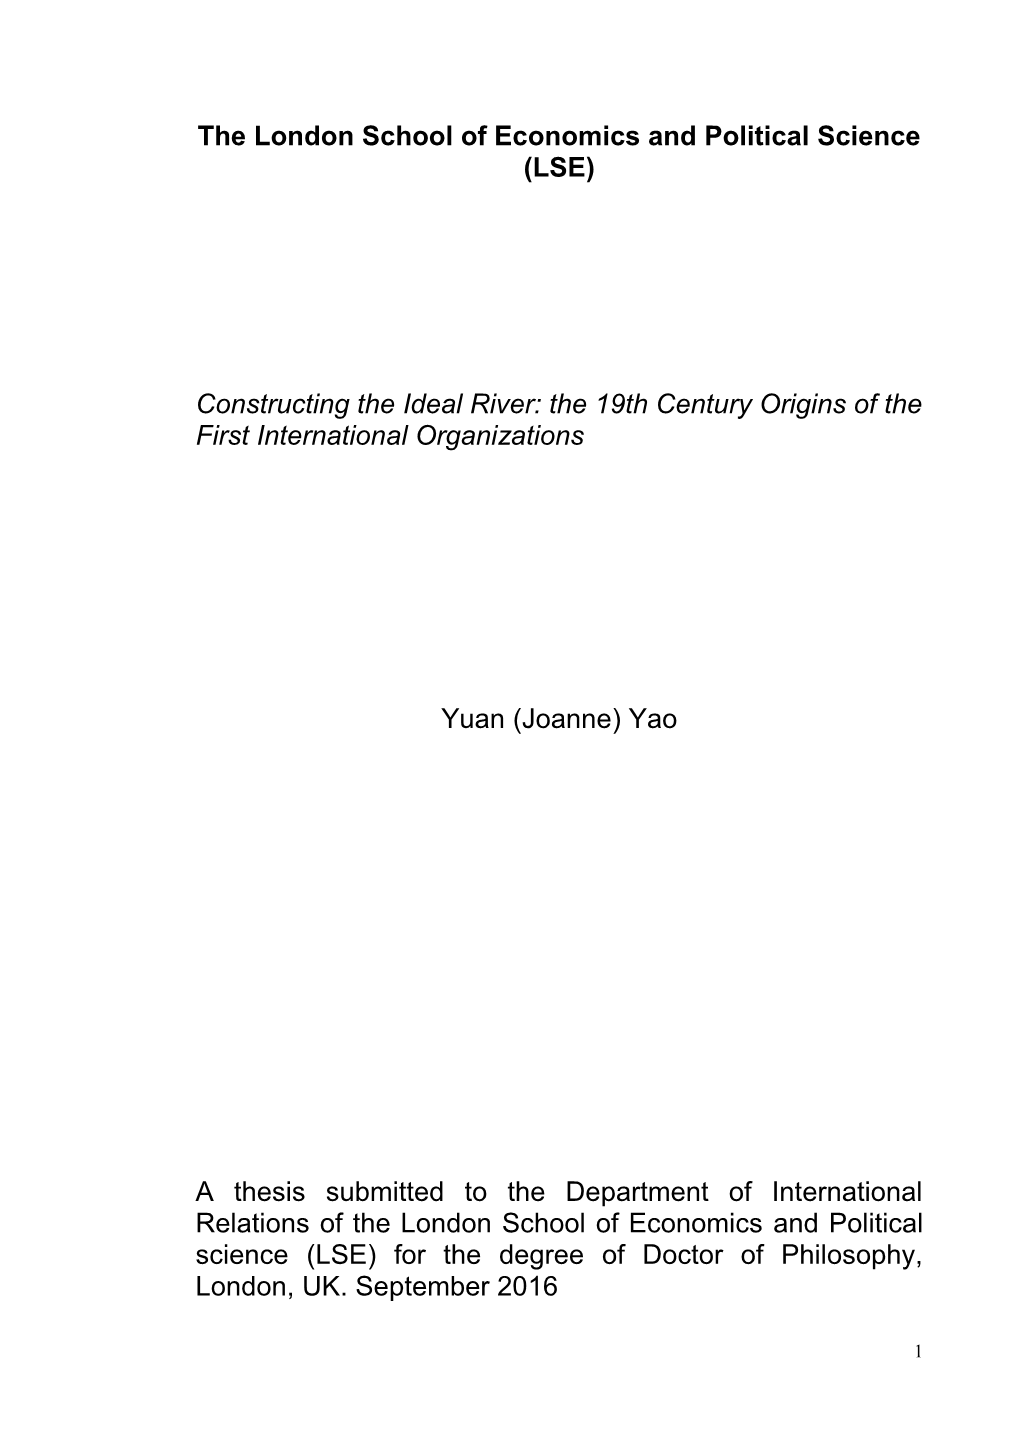 Constructing the Ideal River: the 19Th Century Origins of the First International Organizations